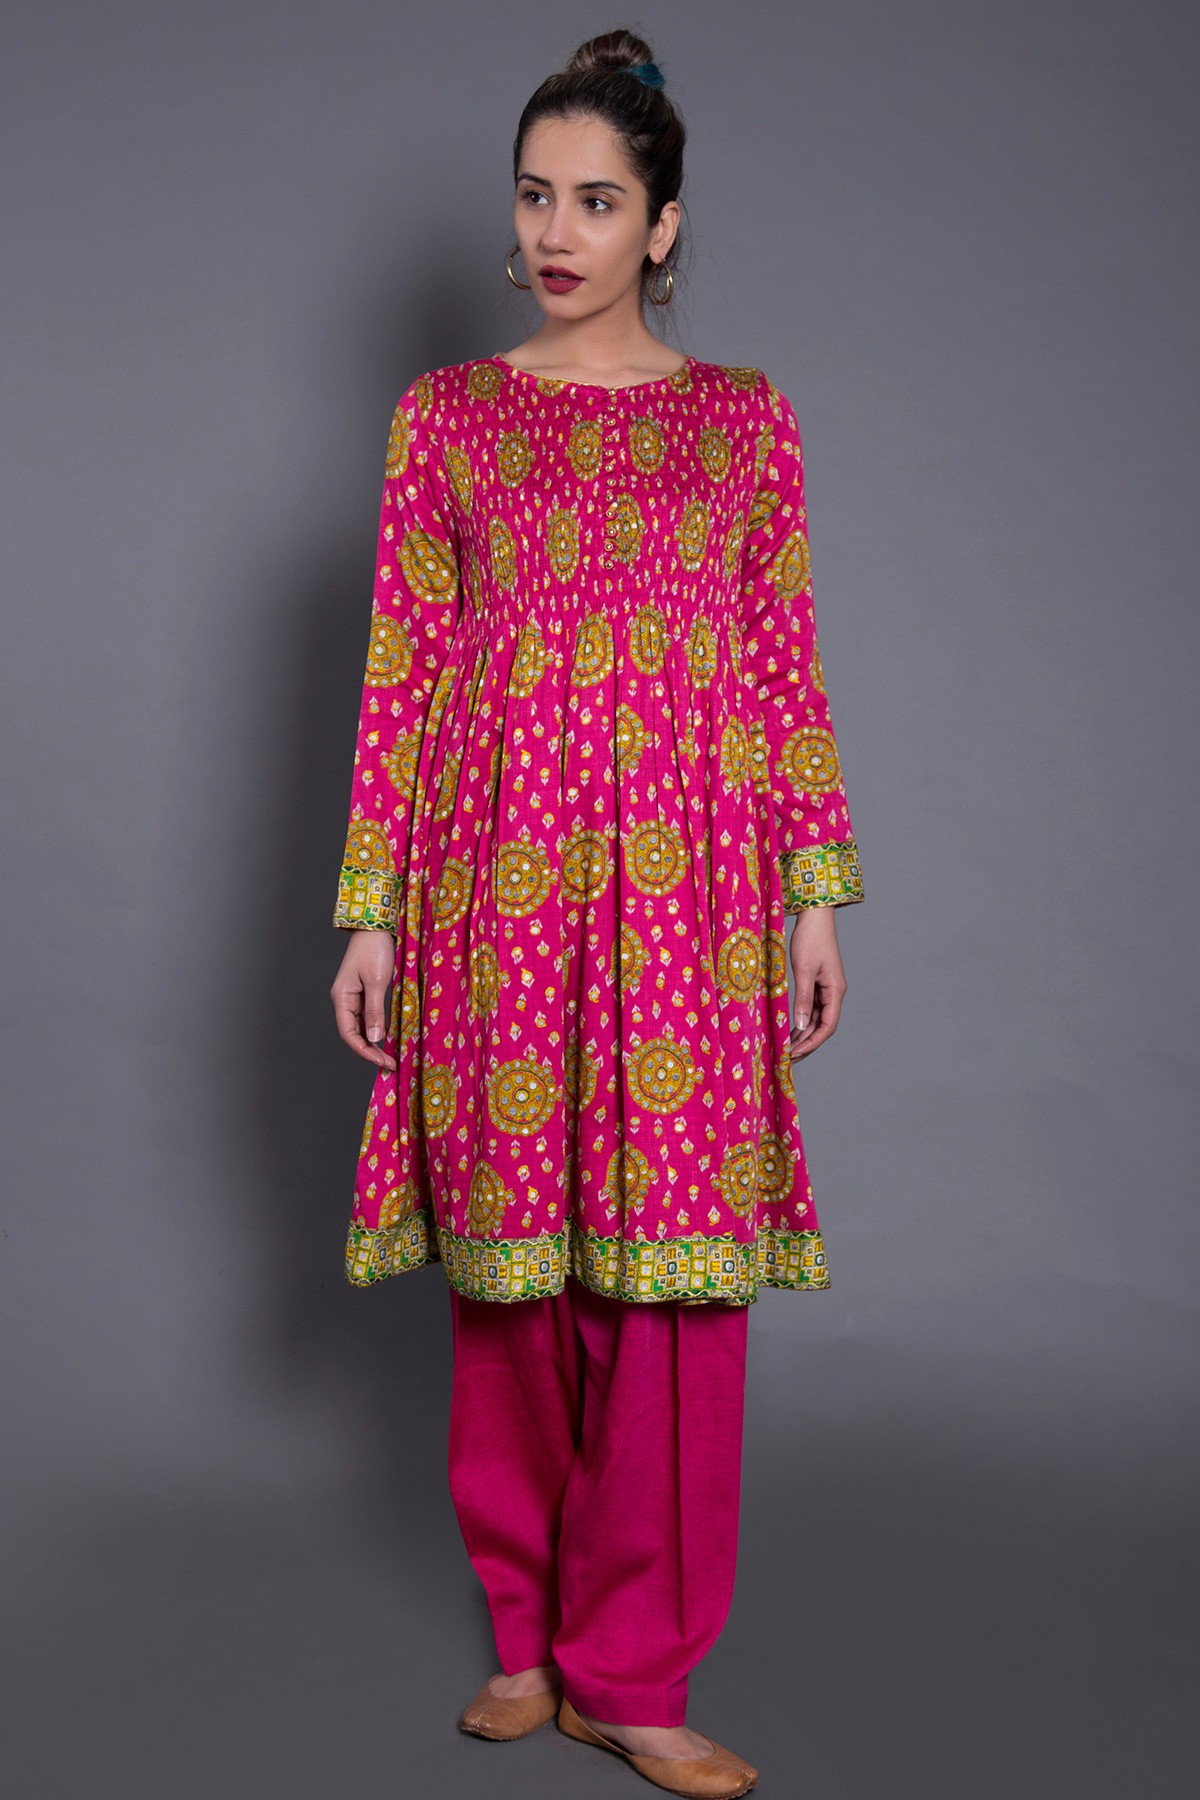 Pink 2 piece ready to wear dress by Generation winter collection 2019